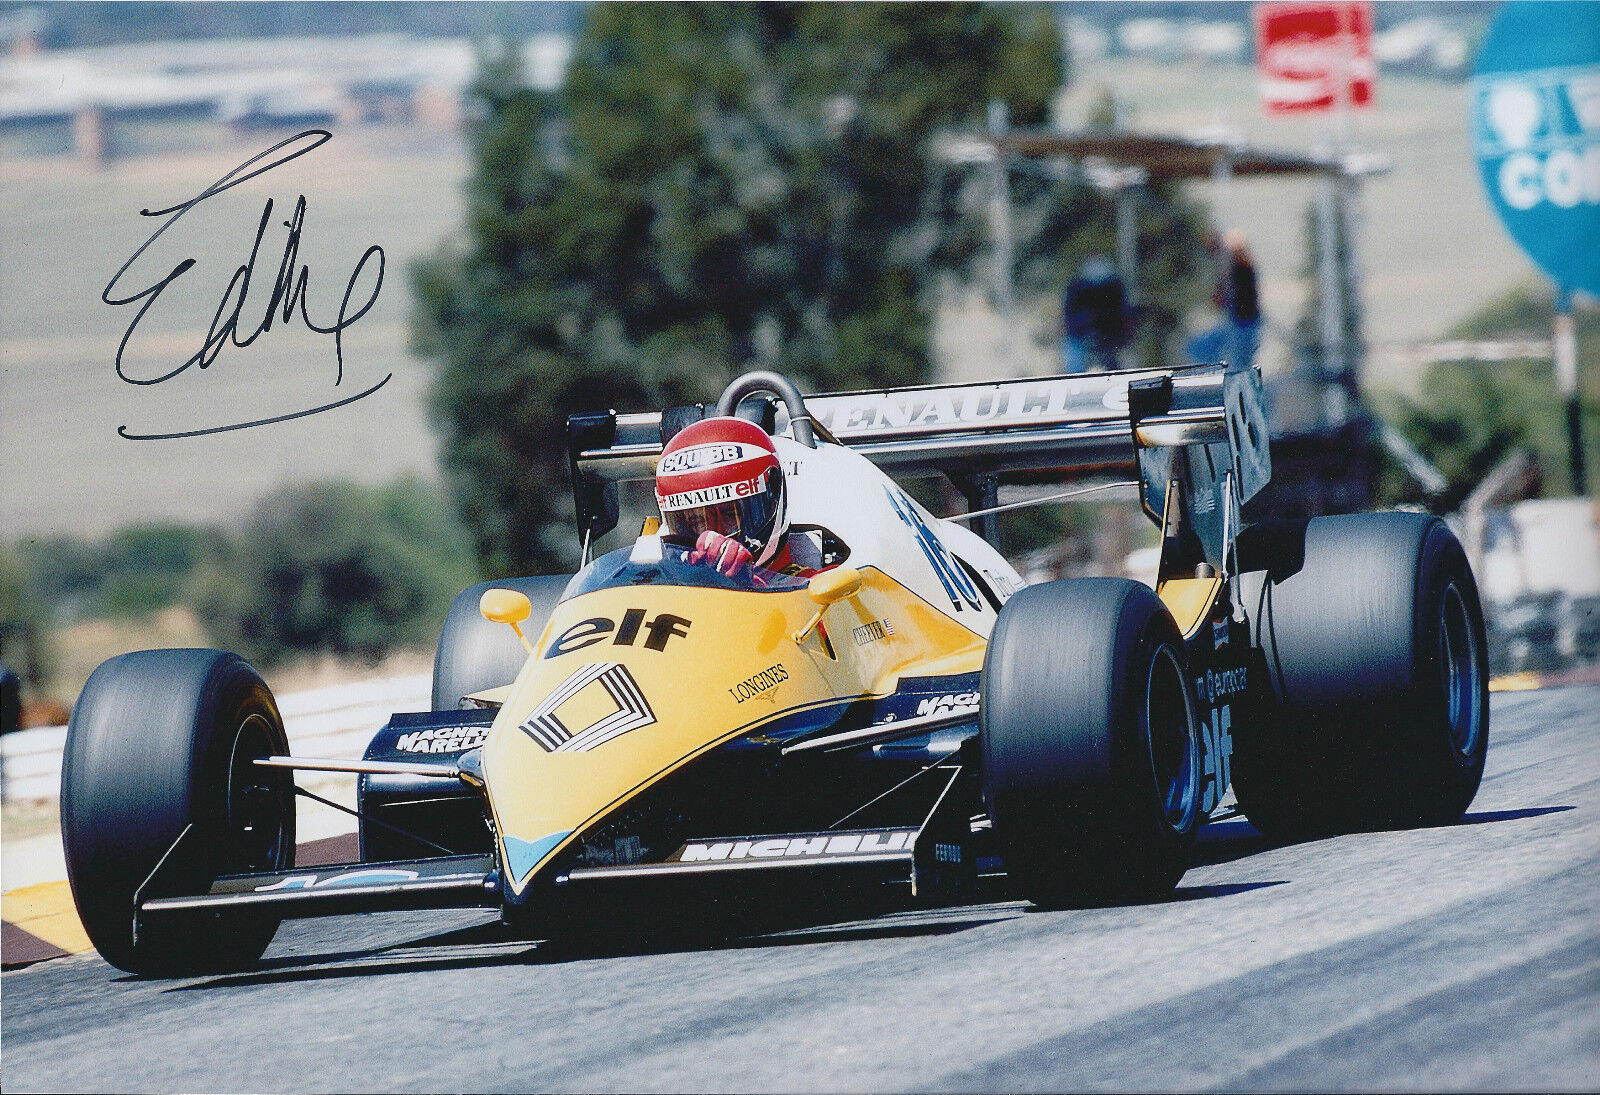 Eddie CHEEVER SIGNED RENAULT Elf GRAND PRIX Autograph 12x8 Photo Poster painting AFTAL COA